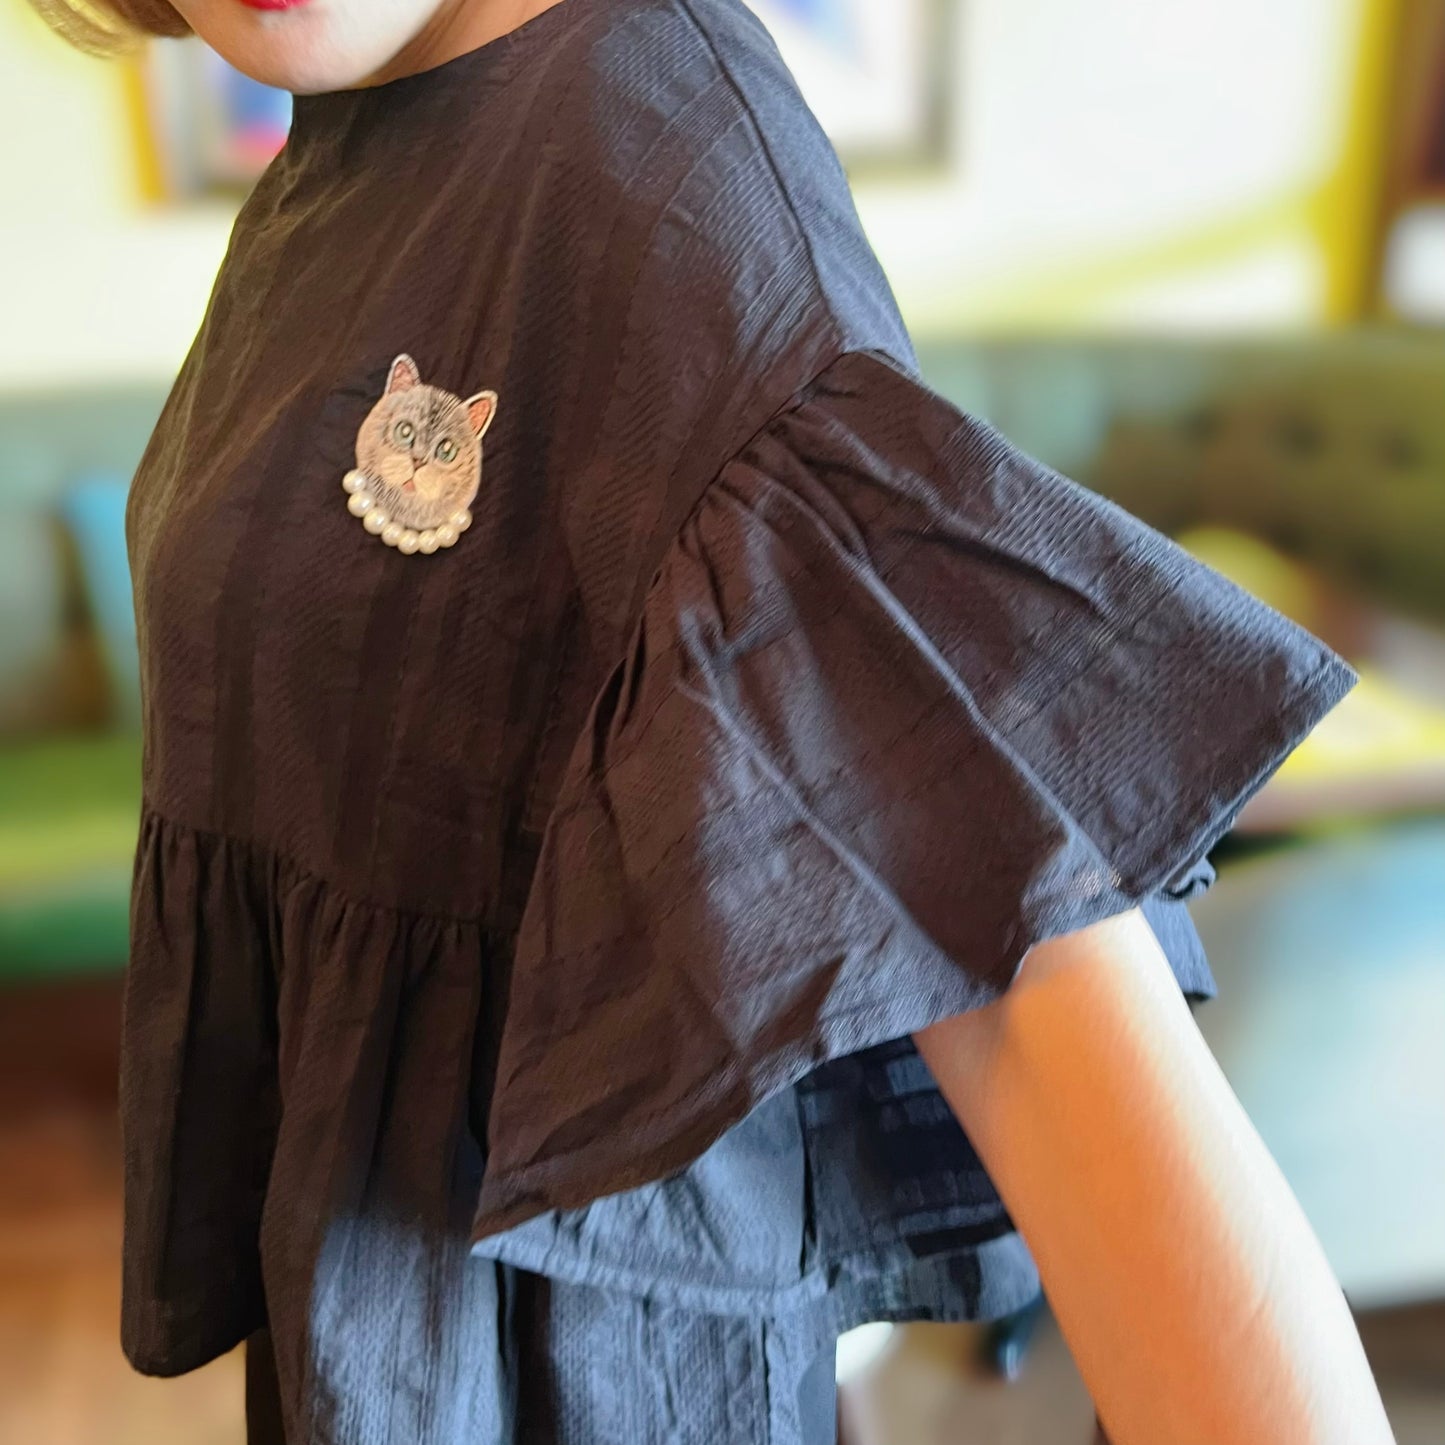 Ruffle cuff cat embroidery relaxed cut top